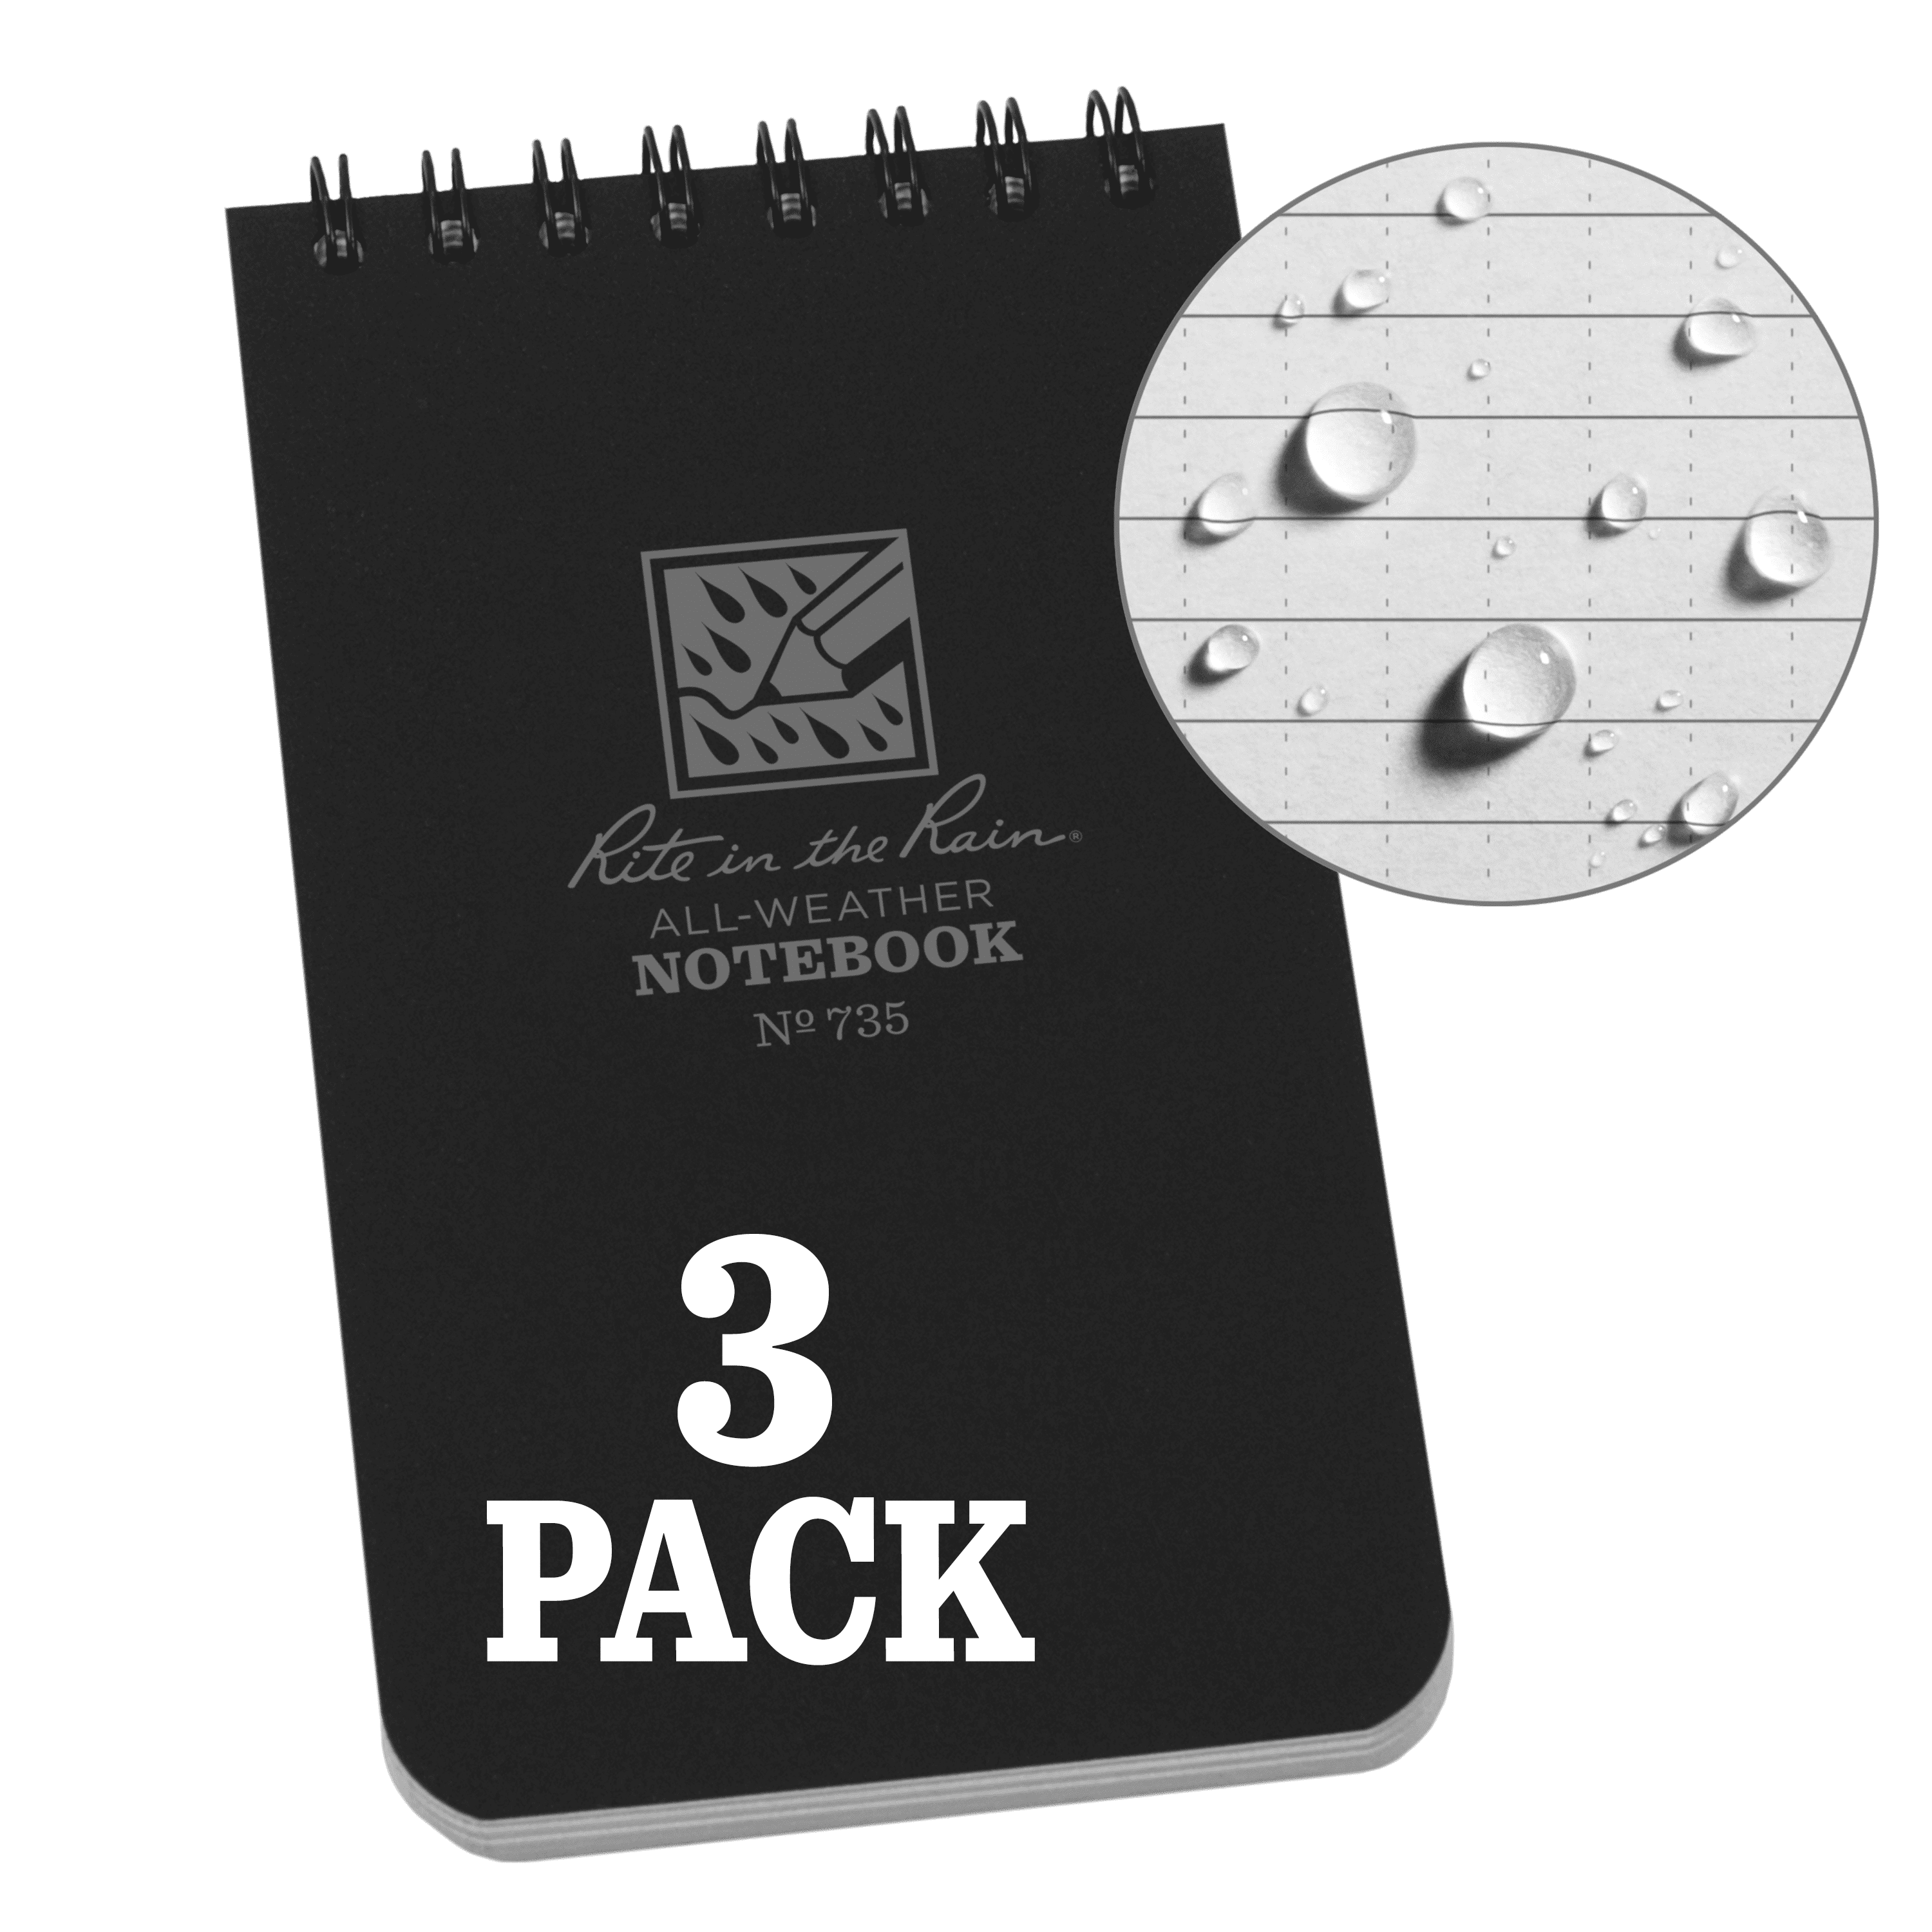 Rite in the Rain Top Spiral Notebook 3" x 5" Tan Brown All Weather 3 Pack